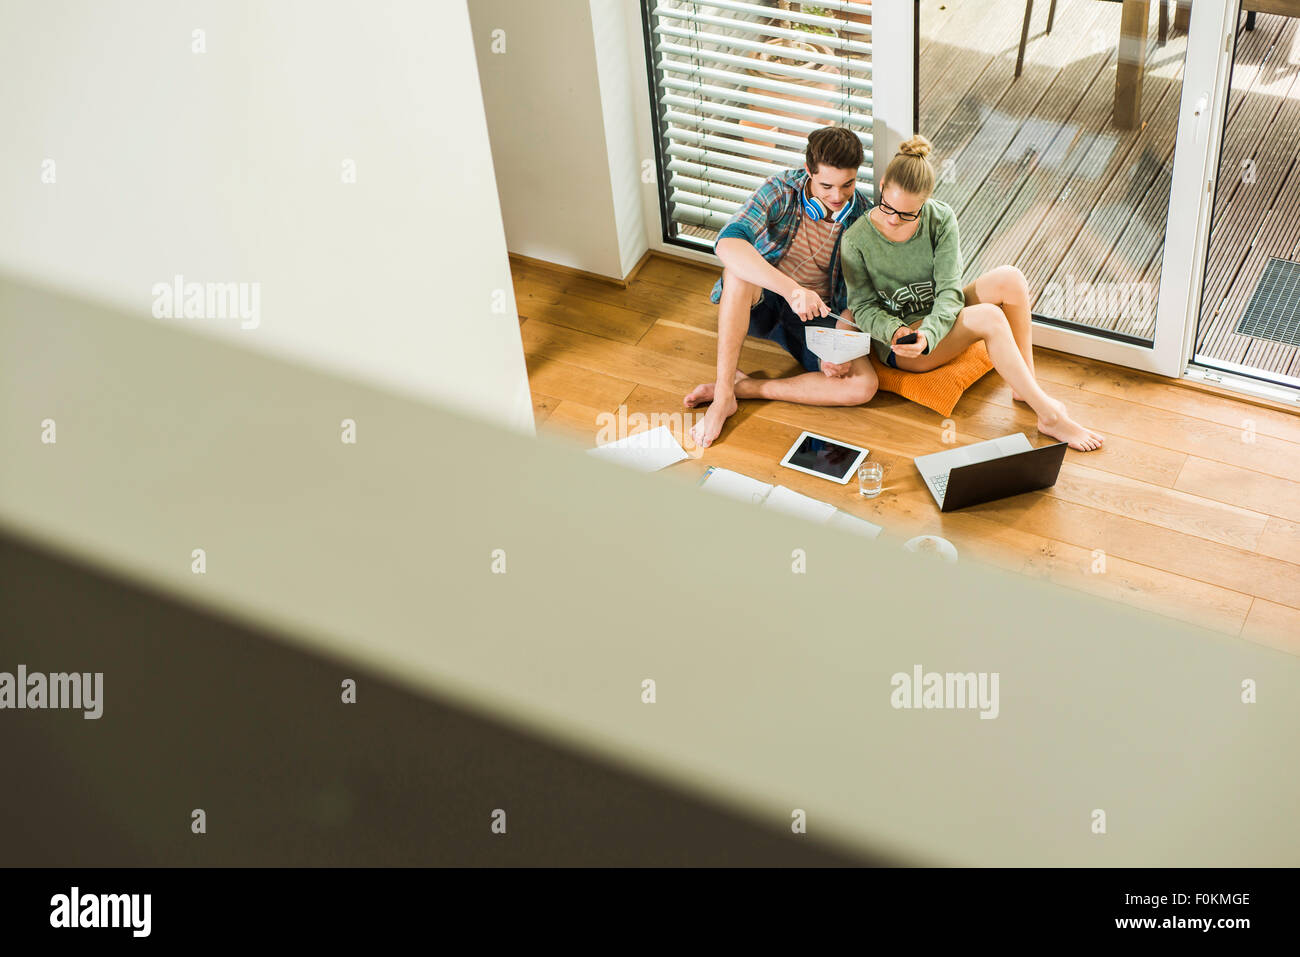 Two students sitting on wooden floor learning Stock Photo